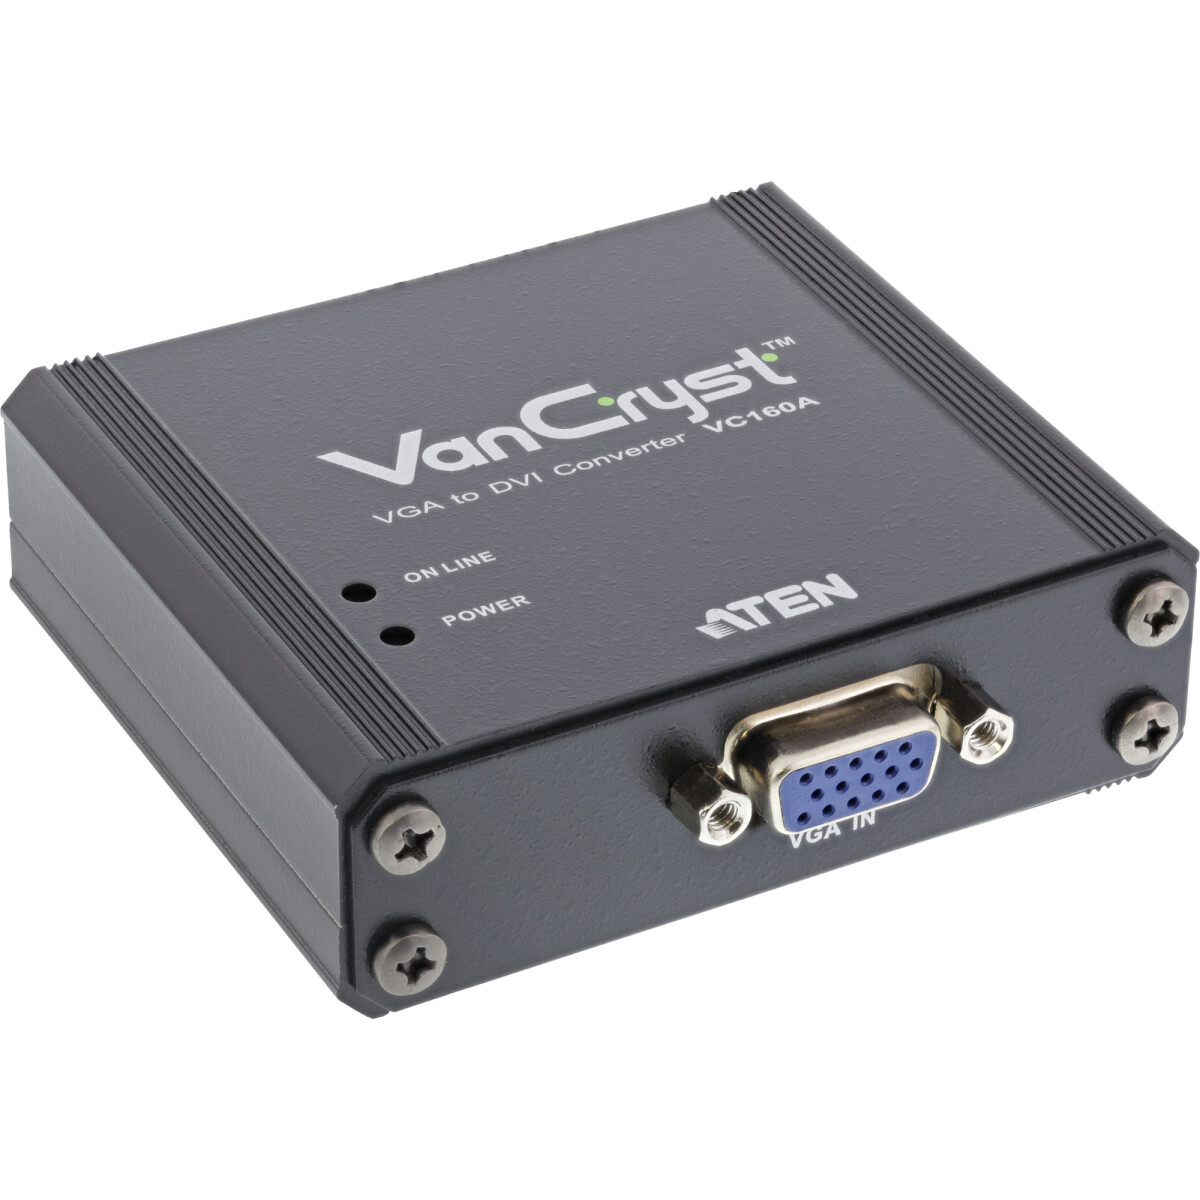 ATEN VC160A VGA to DVI converter, up to 1080p or 1920x1200